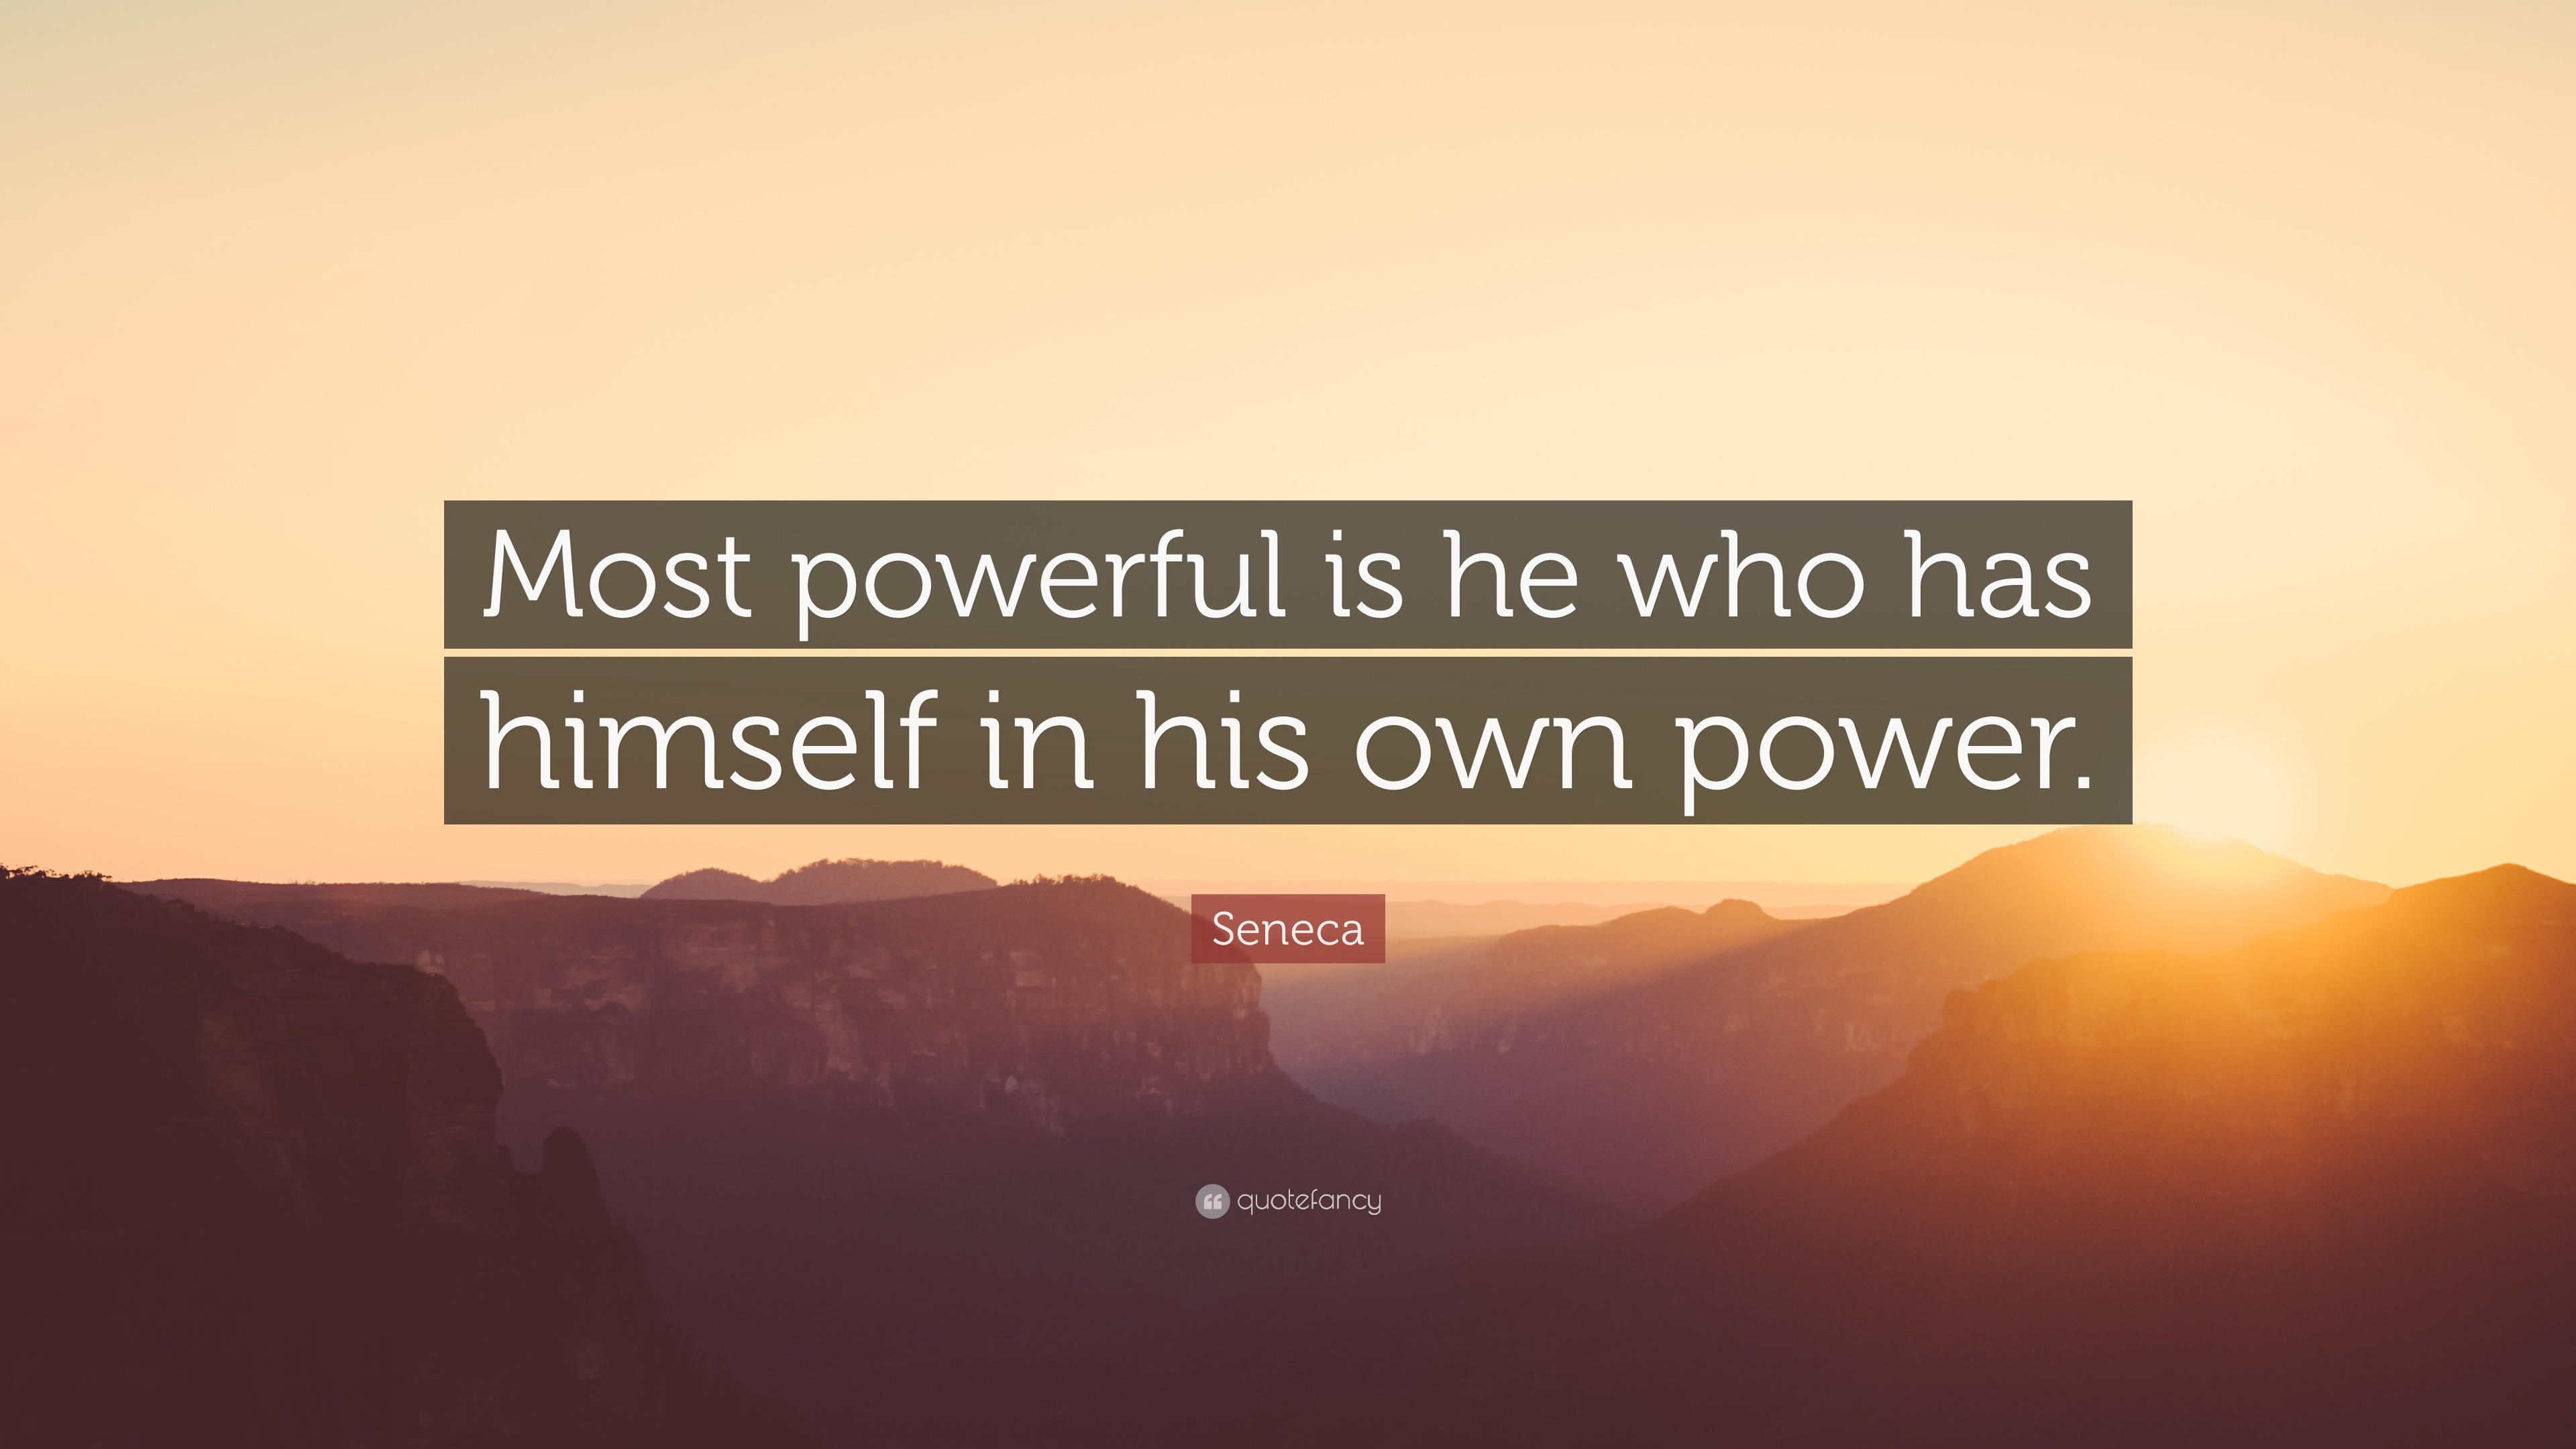 Seneca Quote: “Most powerful is he who has himself in his own power.”